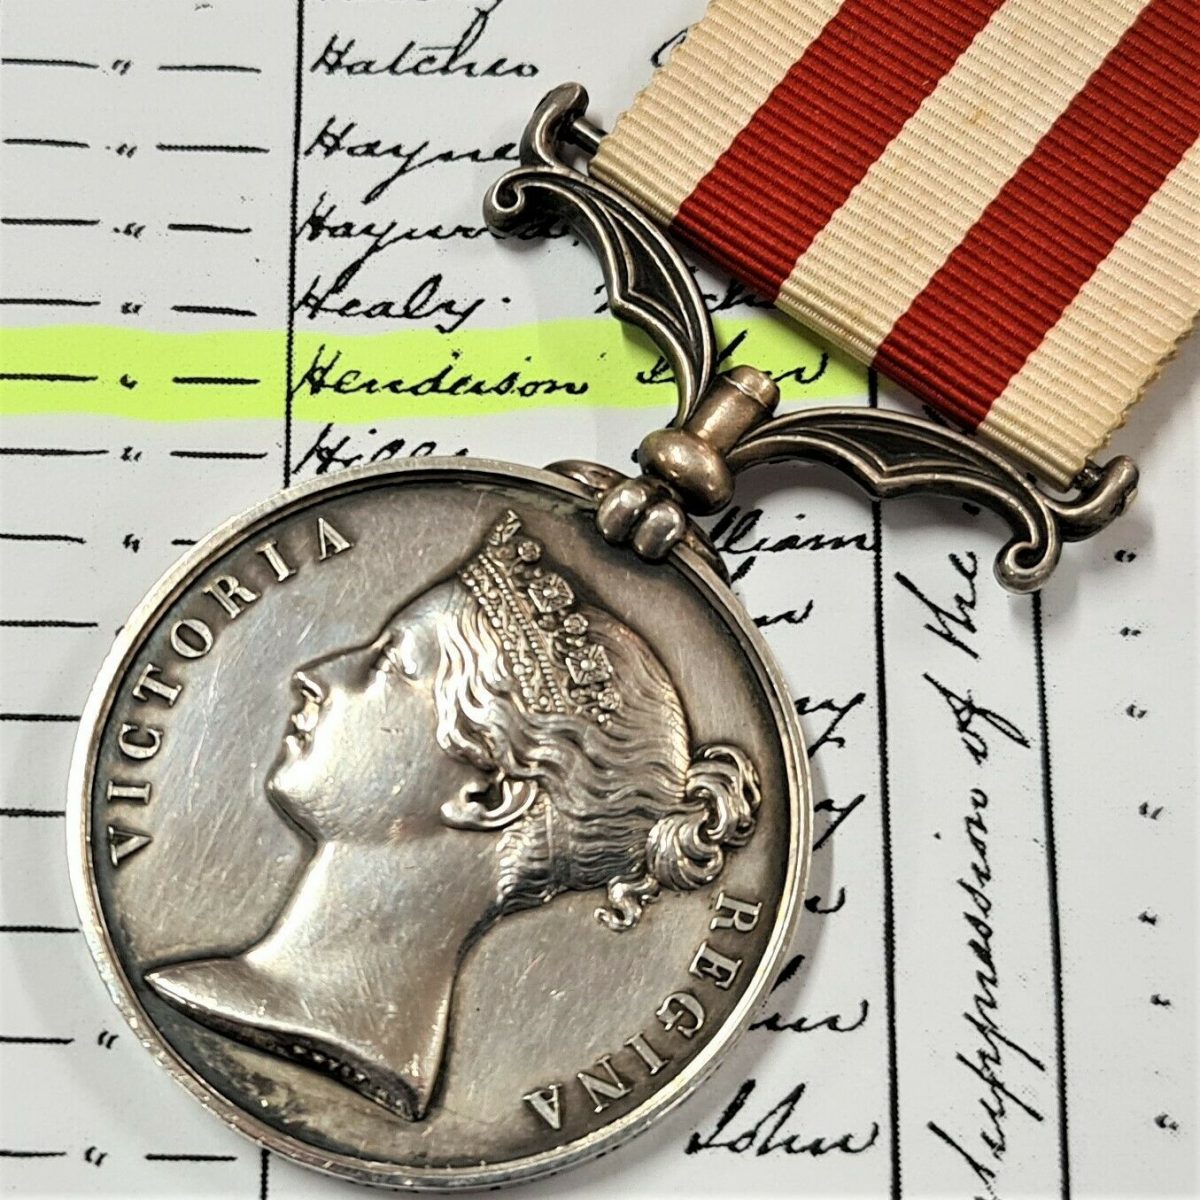 INDIAN MUTINY MEDAL J HENDERSON 20TH REGTIMENT FOOT EAST DEVONSHIRE BRITISH ARMY